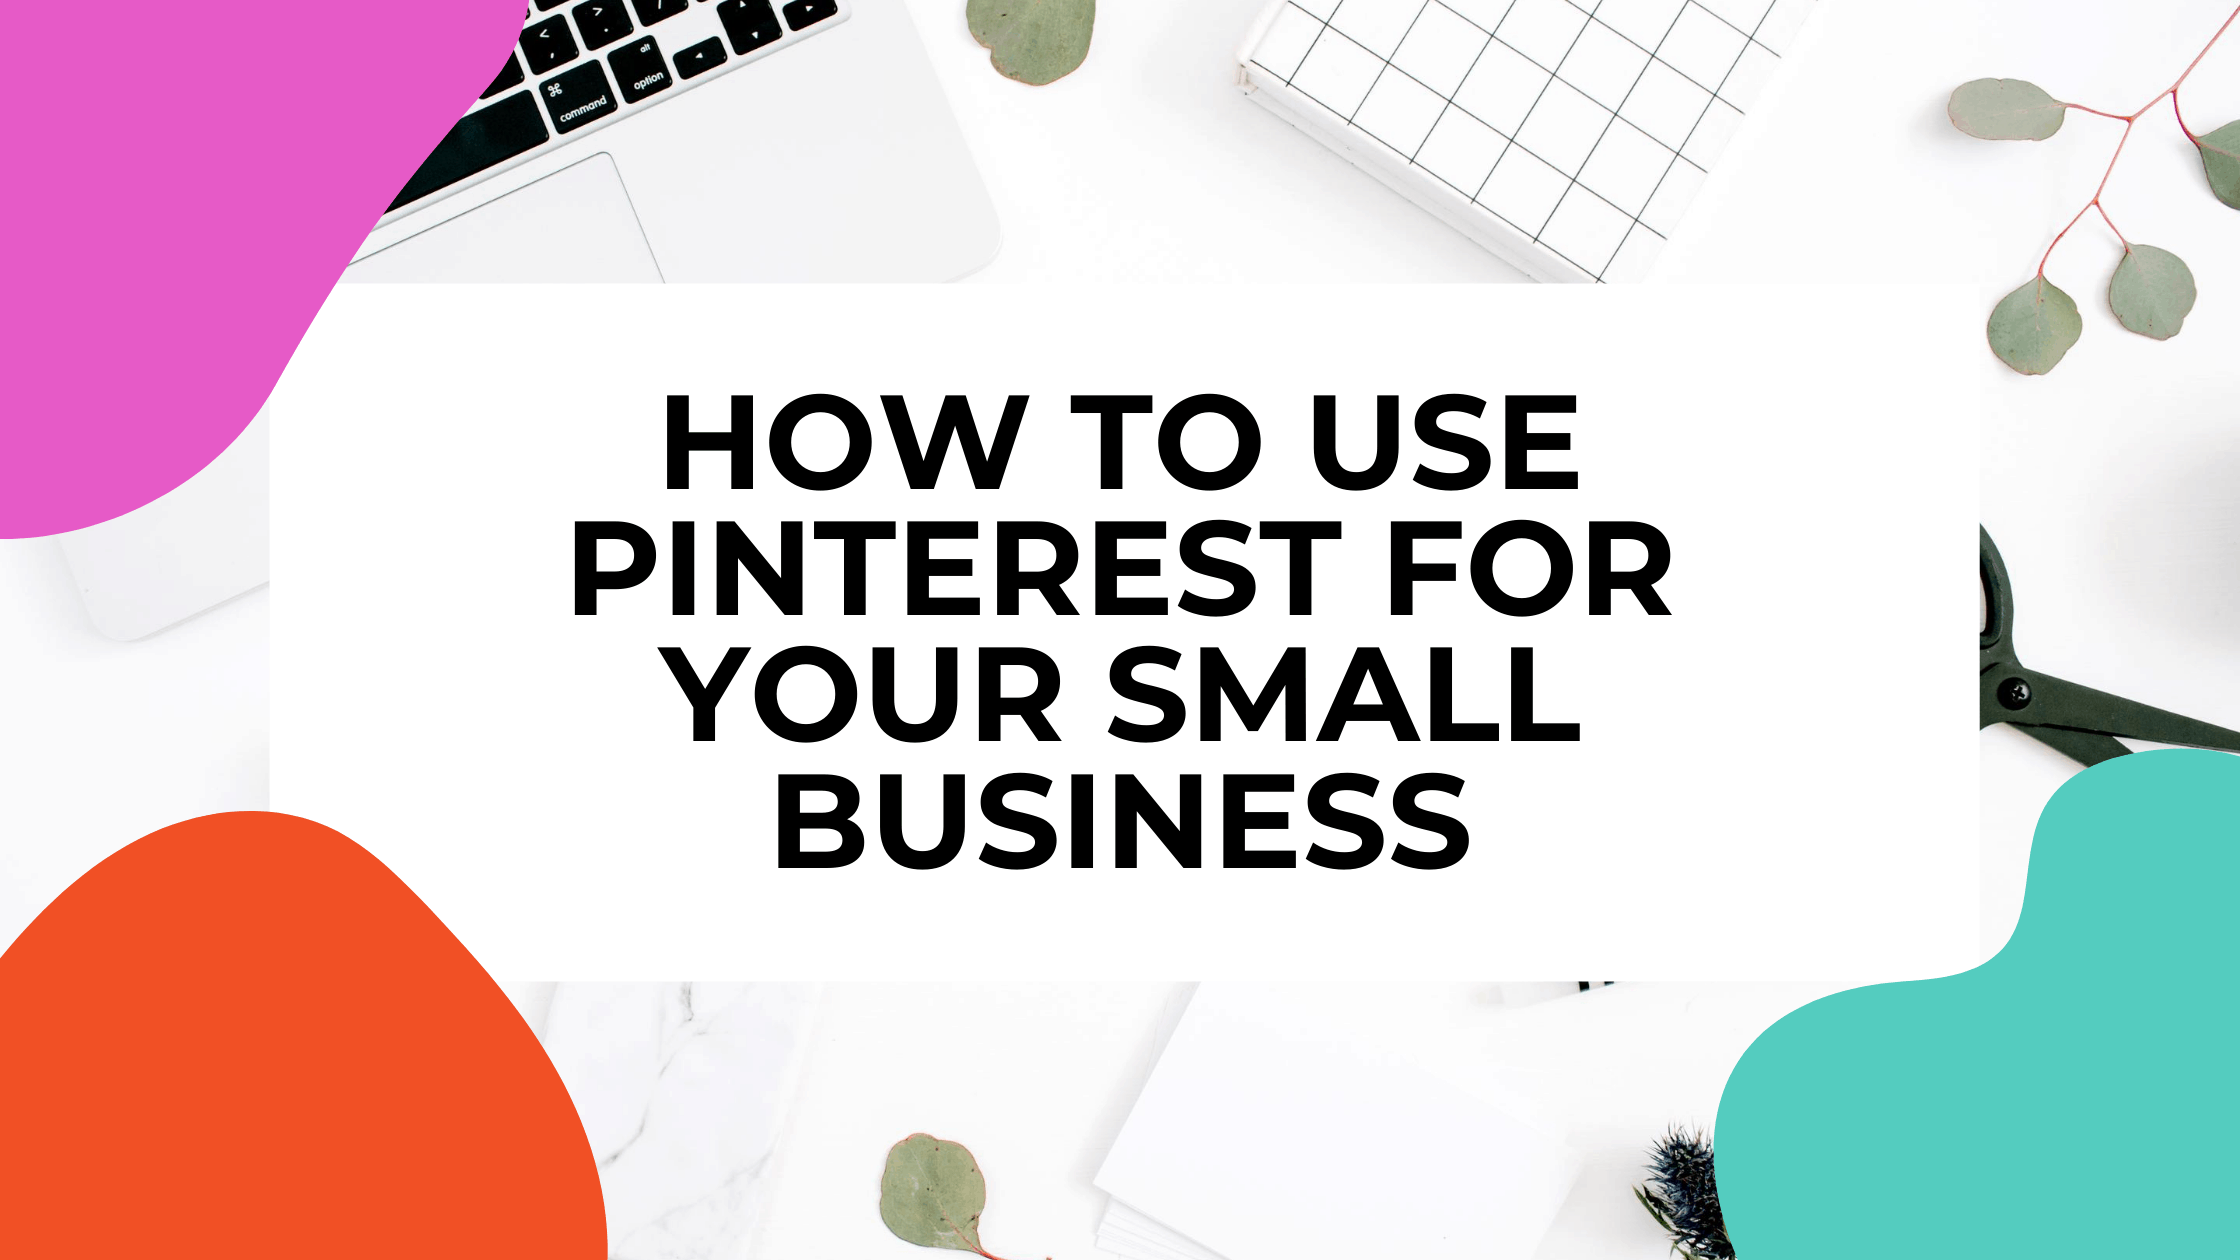 pinterest for business featured image with two keyboards in background